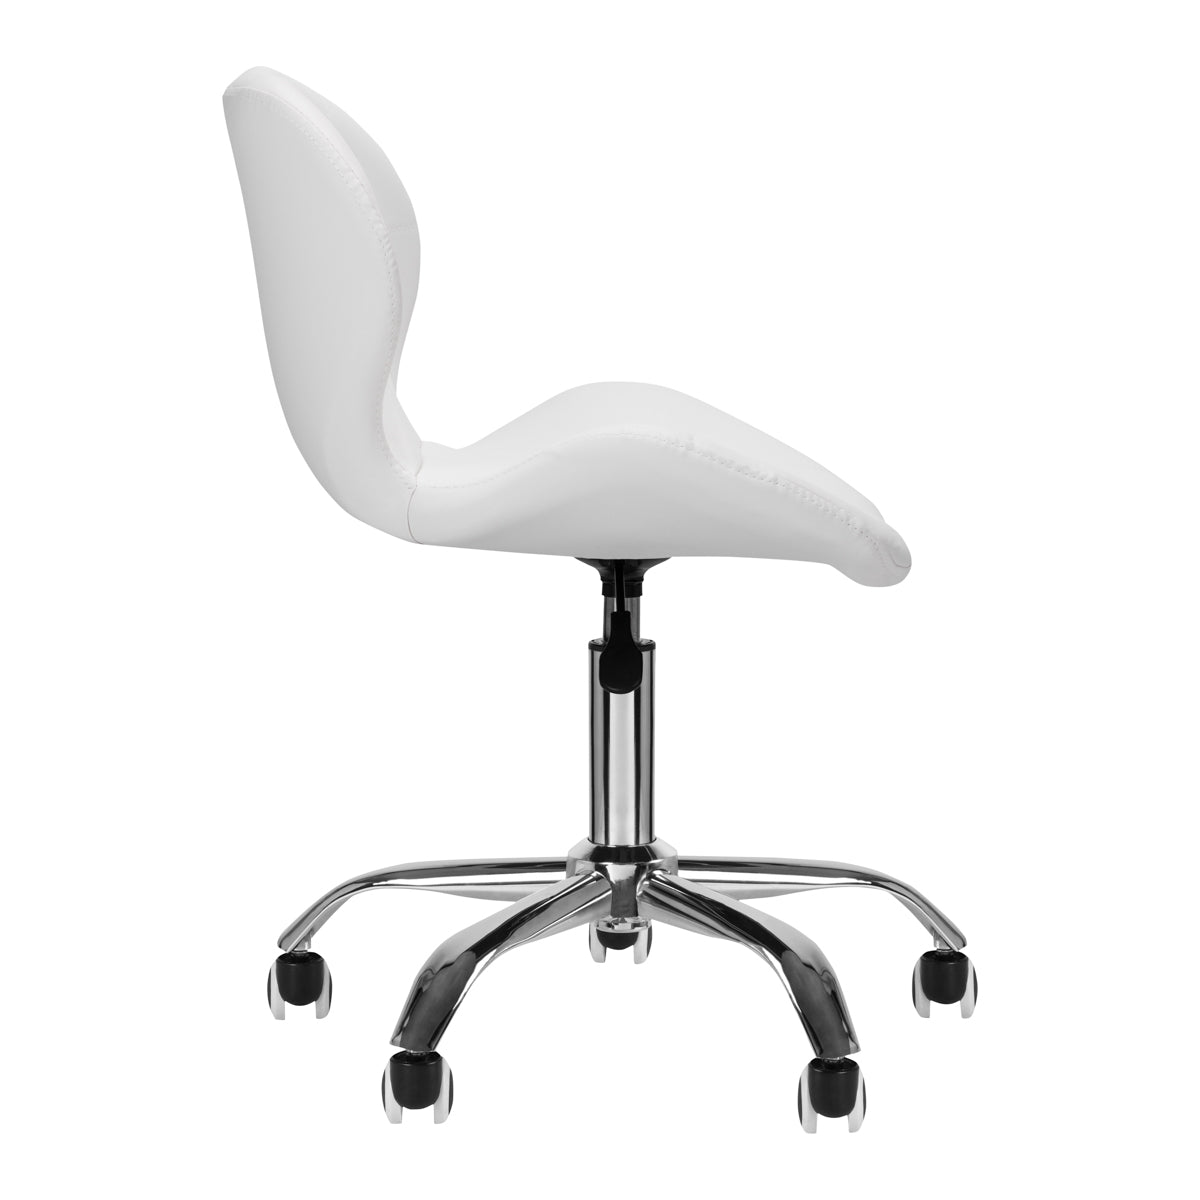 ACTIVESHOP COSMETIC STOOL QS-06 WHITE